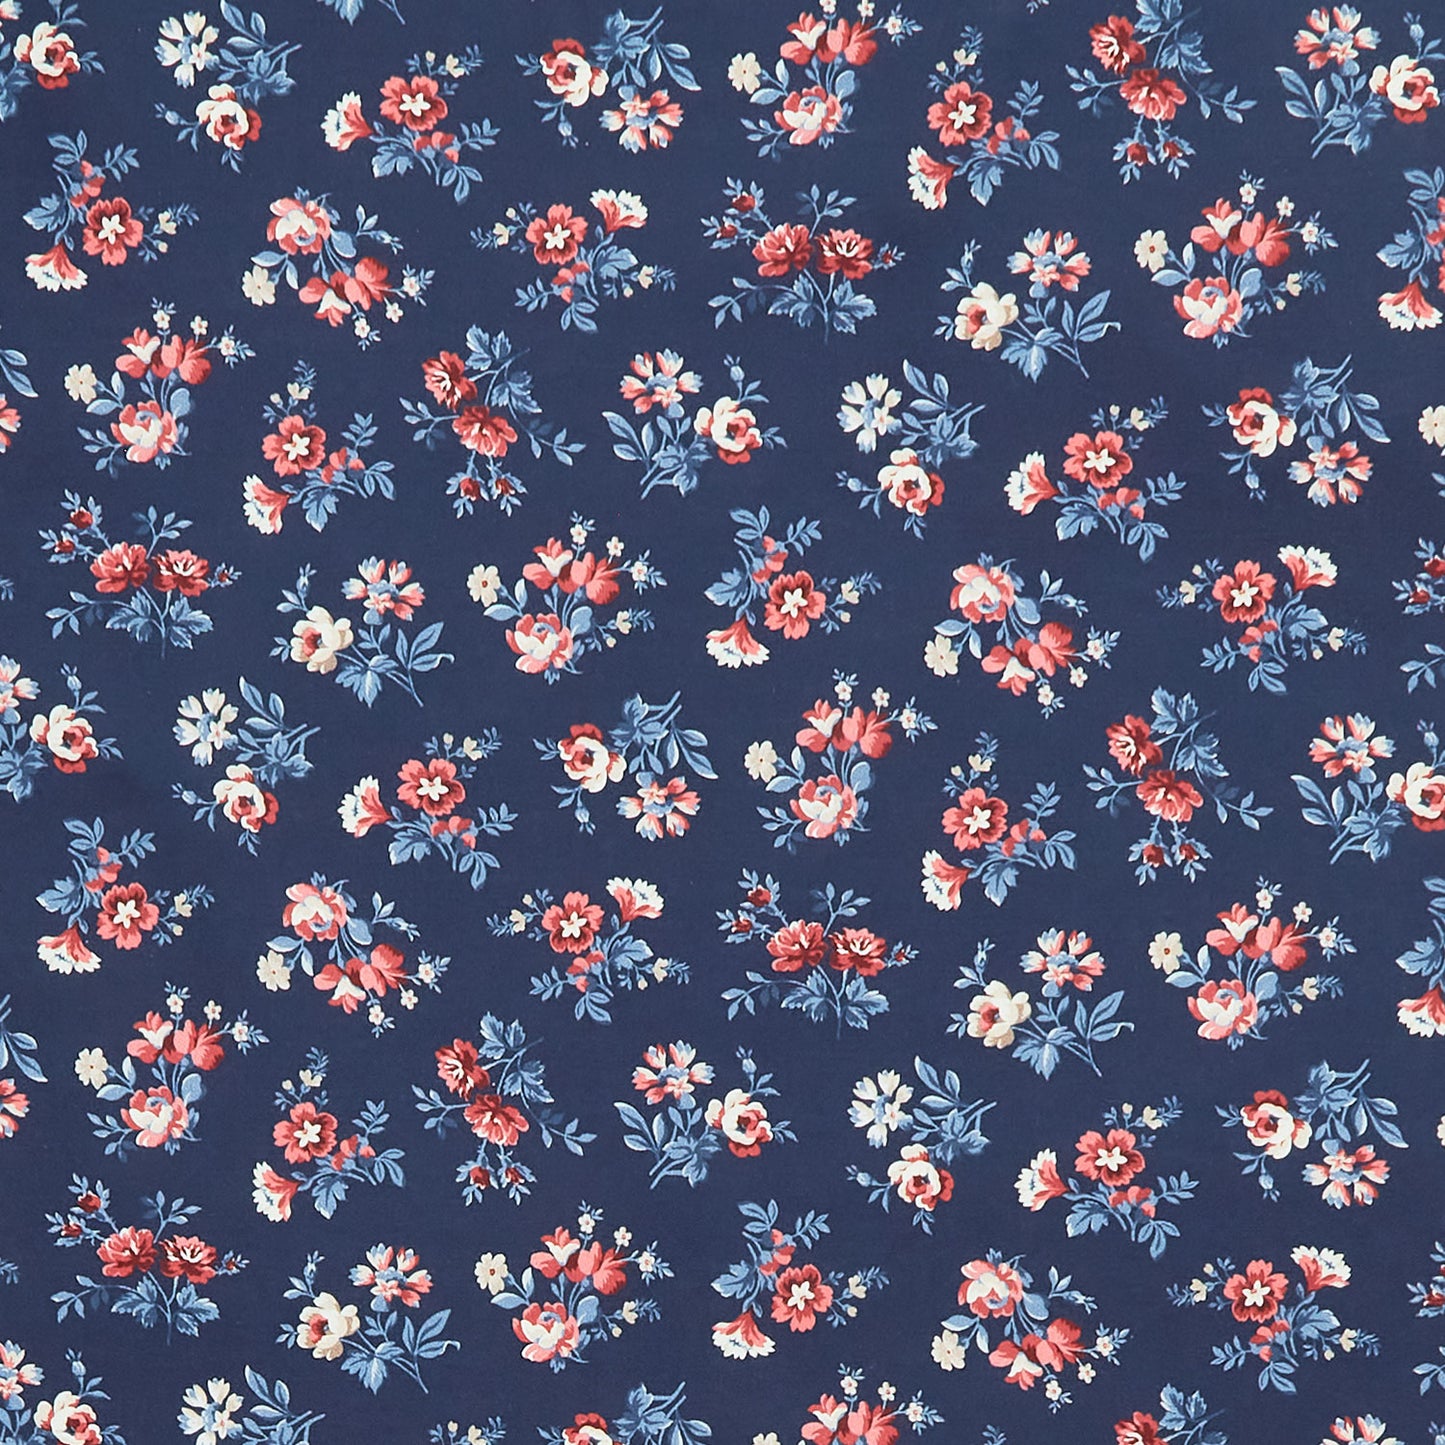 Victory Garden - Tossed Small Vintage Florals Navy Yardage Do not publish till 7/1 Primary Image